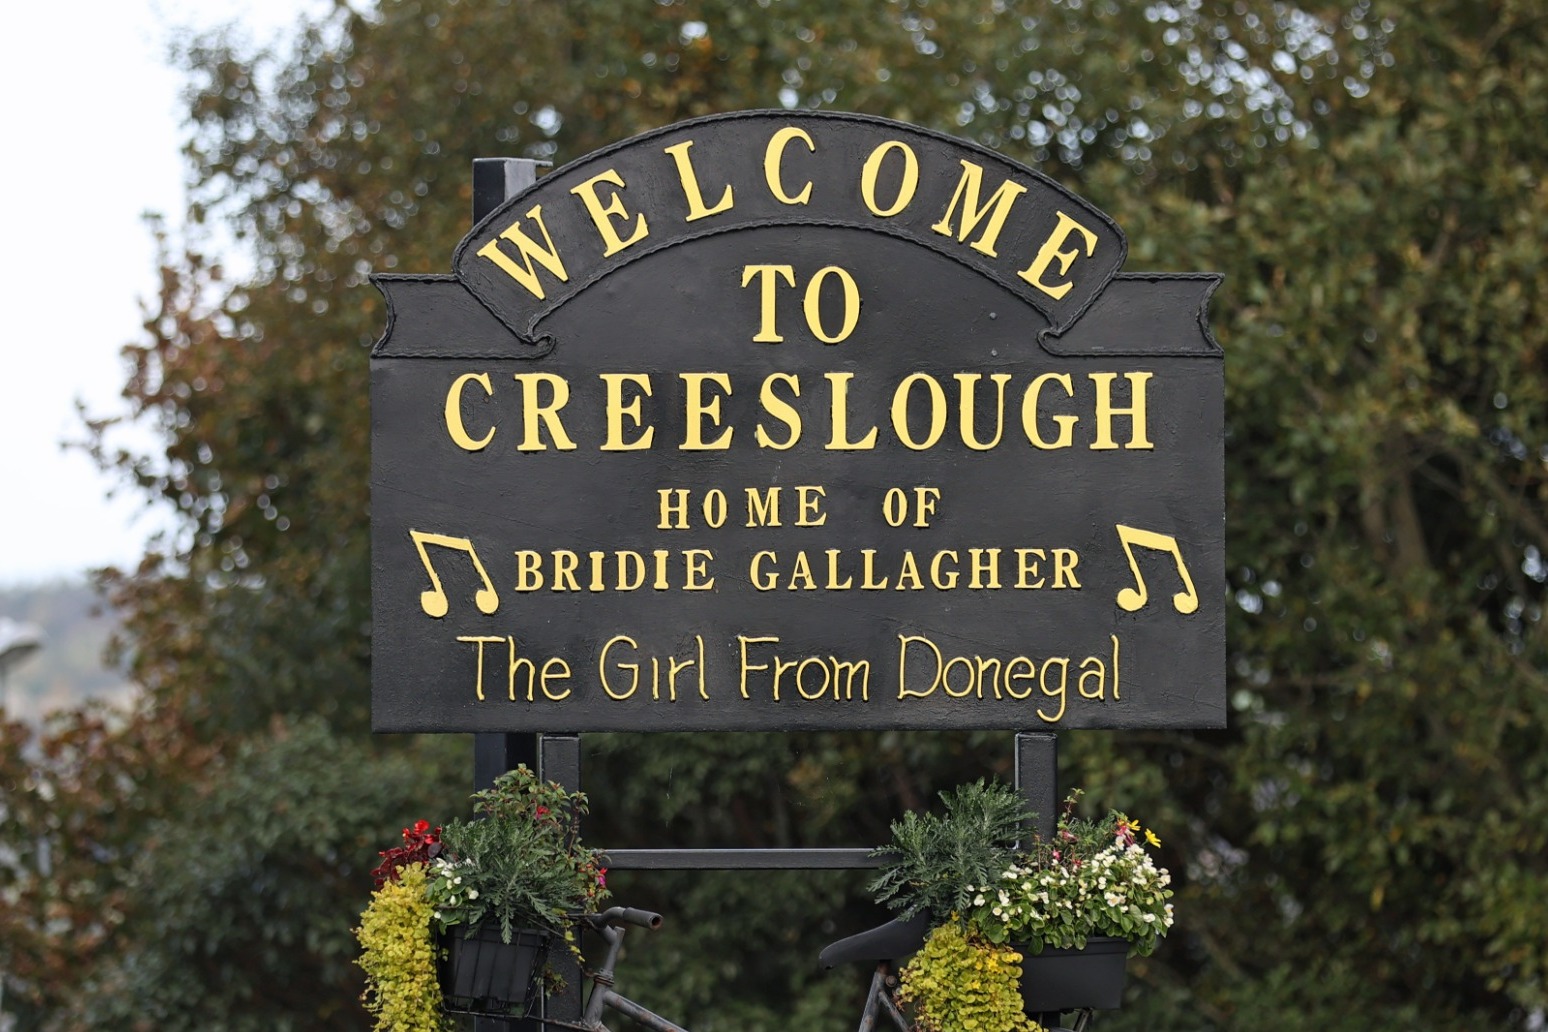 Father describes daughter, 14, killed in Creeslough explosion as ‘little gem’ 